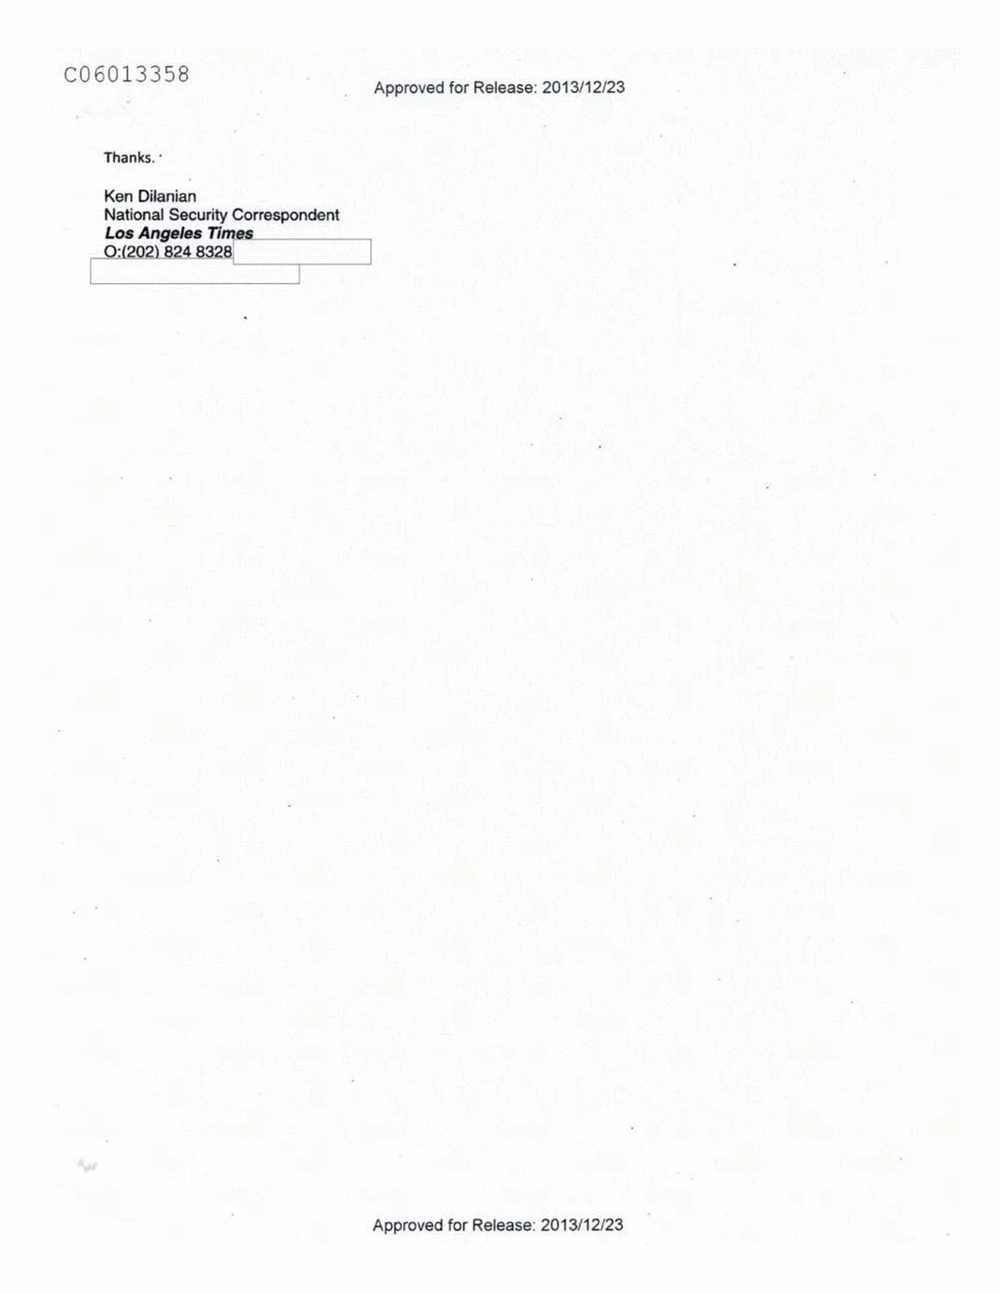 Page 279 from Email Correspondence Between Reporters and CIA Flacks